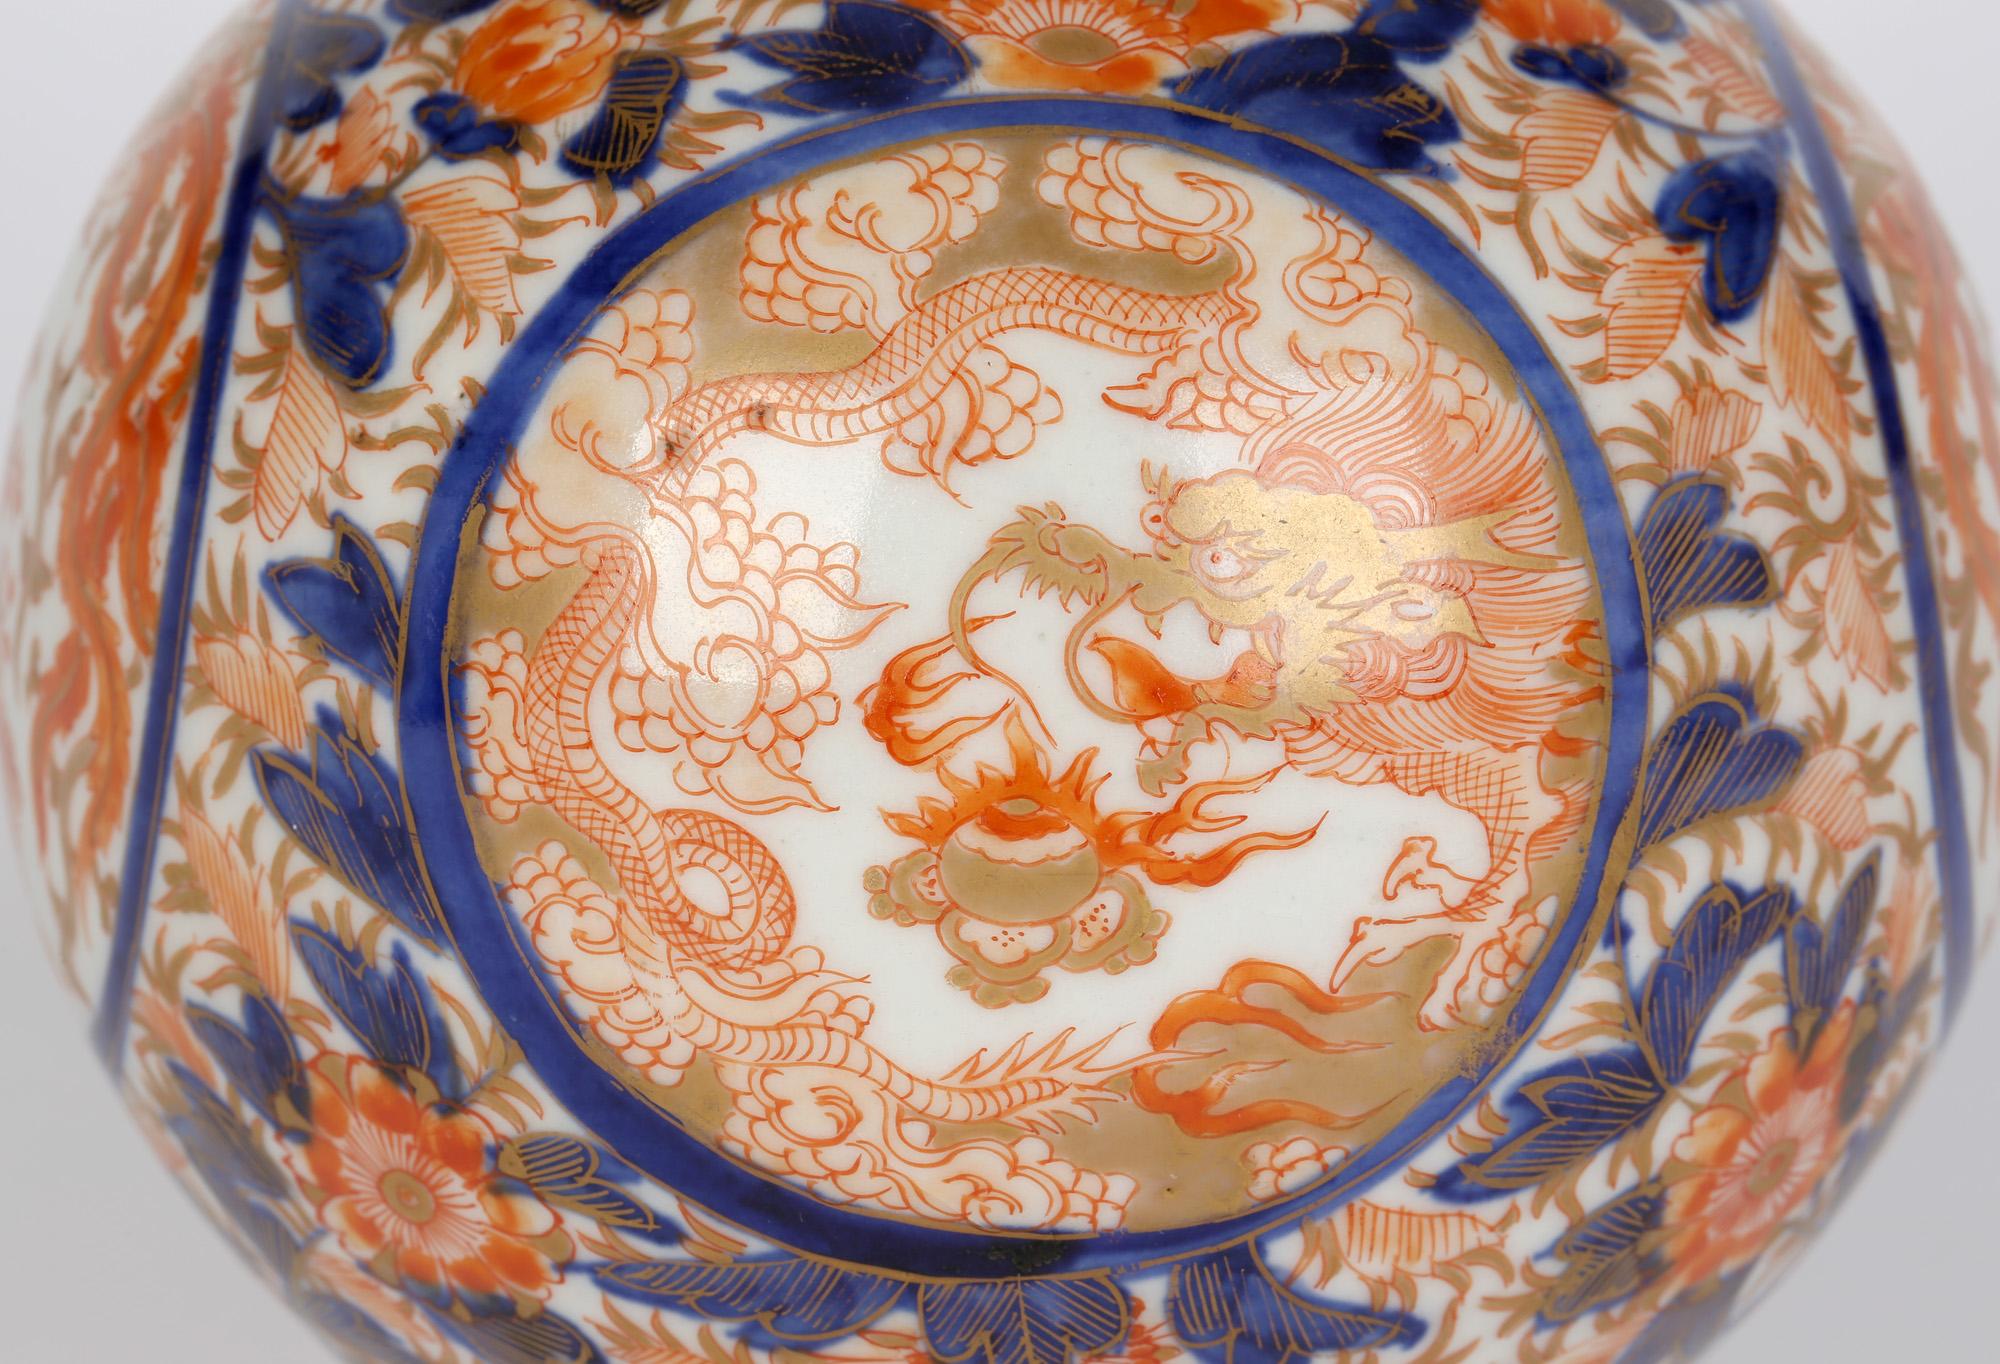 Exceptional Japanese porcelain Imari painted vase with panels containing dragons chasing the flaming pearl and with Ho Ho birds amidst flowering shrubs believed to date to the early 19th century. The vase stands on a narrow rounded foot with a